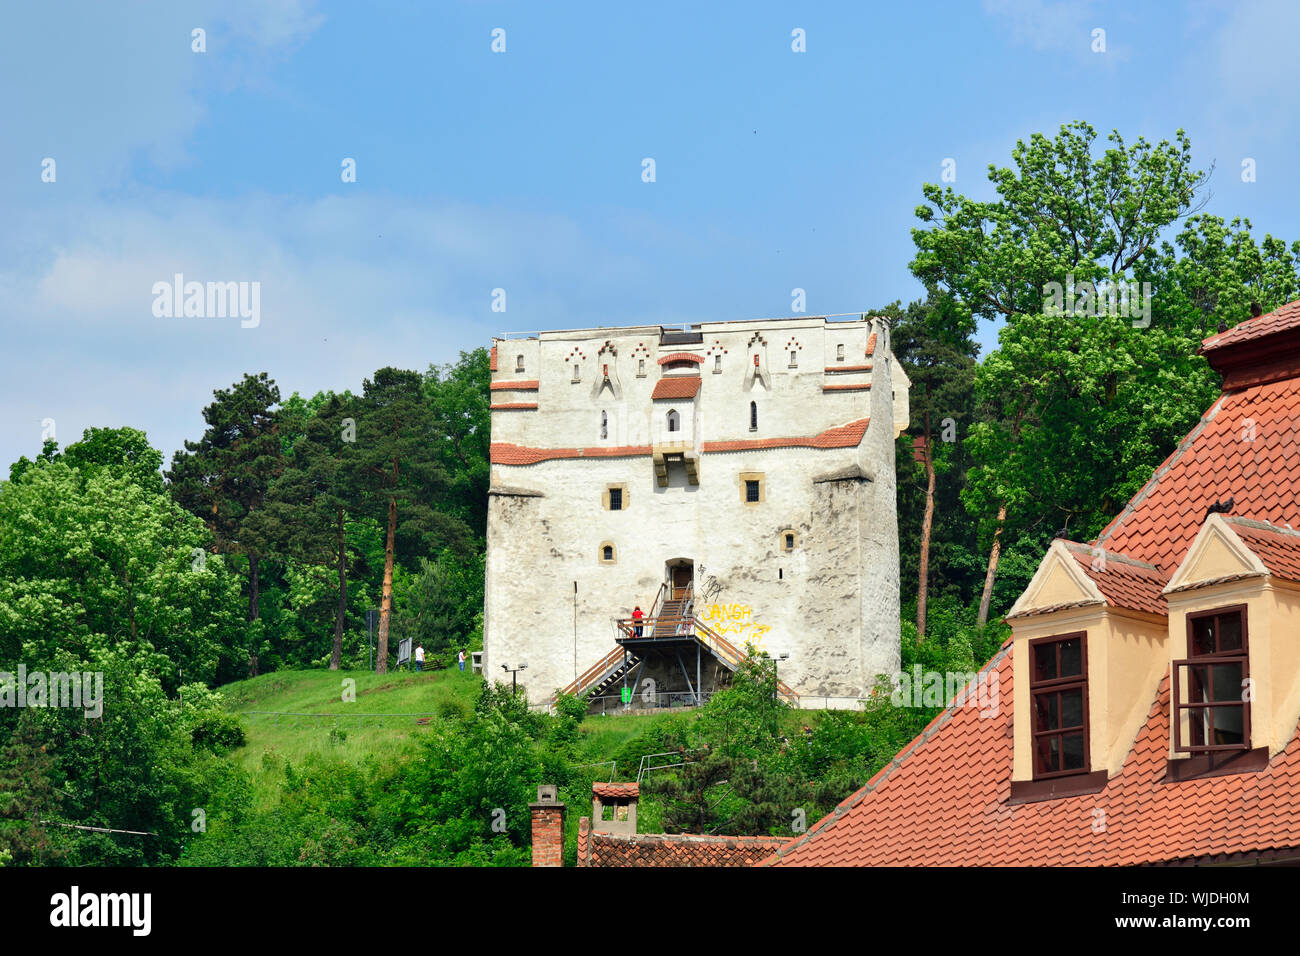 The White Tower was built in 1494 on top of a rock. The entrance of the tower was so high that a ladder was needed in order to get inside. Brasov, Rom Stock Photo